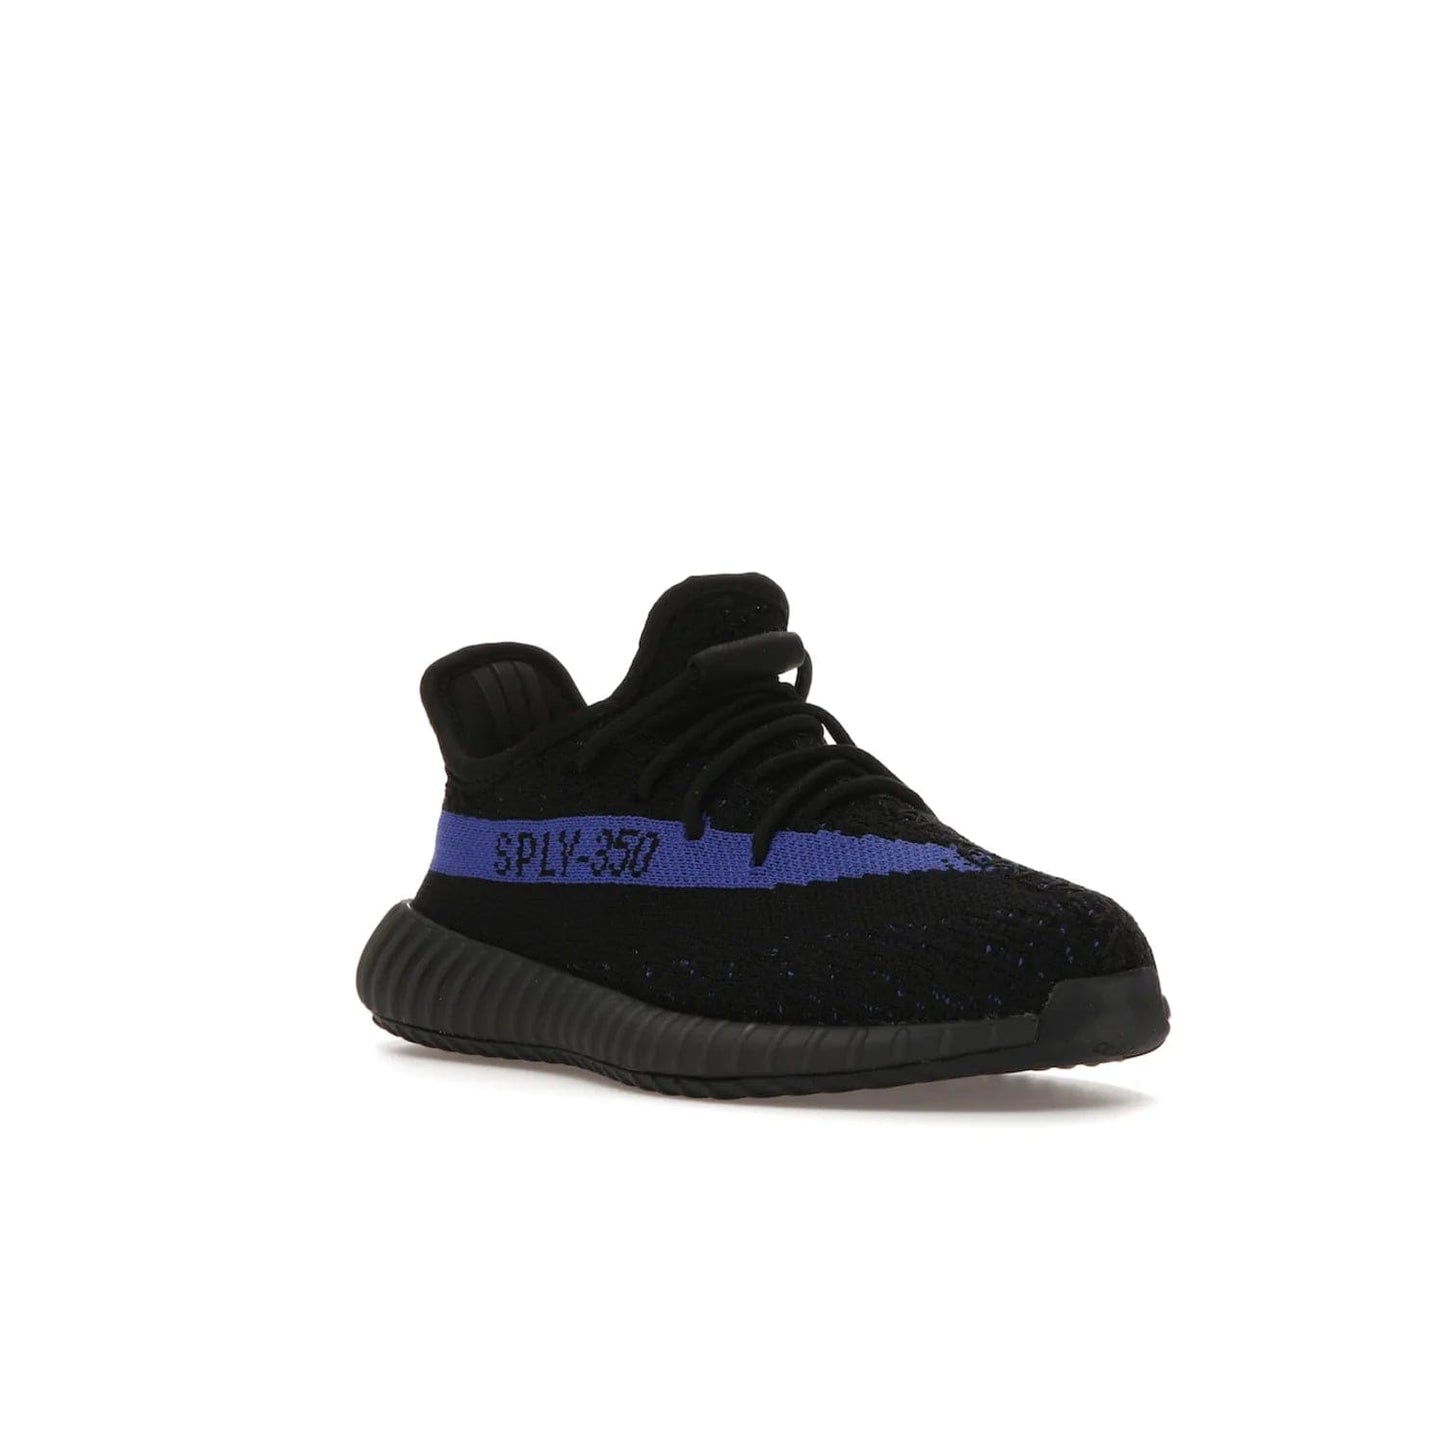 adidas Yeezy Boost 350 V2 Dazzling Blue (Kids) - Image 6 - Only at www.BallersClubKickz.com - Shop the adidas Yeezy Boost 350 V2 Dazzling Blue (Kids). Features a black Primeknit upper with a royal blue 'SPLY-350' streak and a full-length Boost midsole. Durable rubber outsole provides plenty of traction. Available for $160.